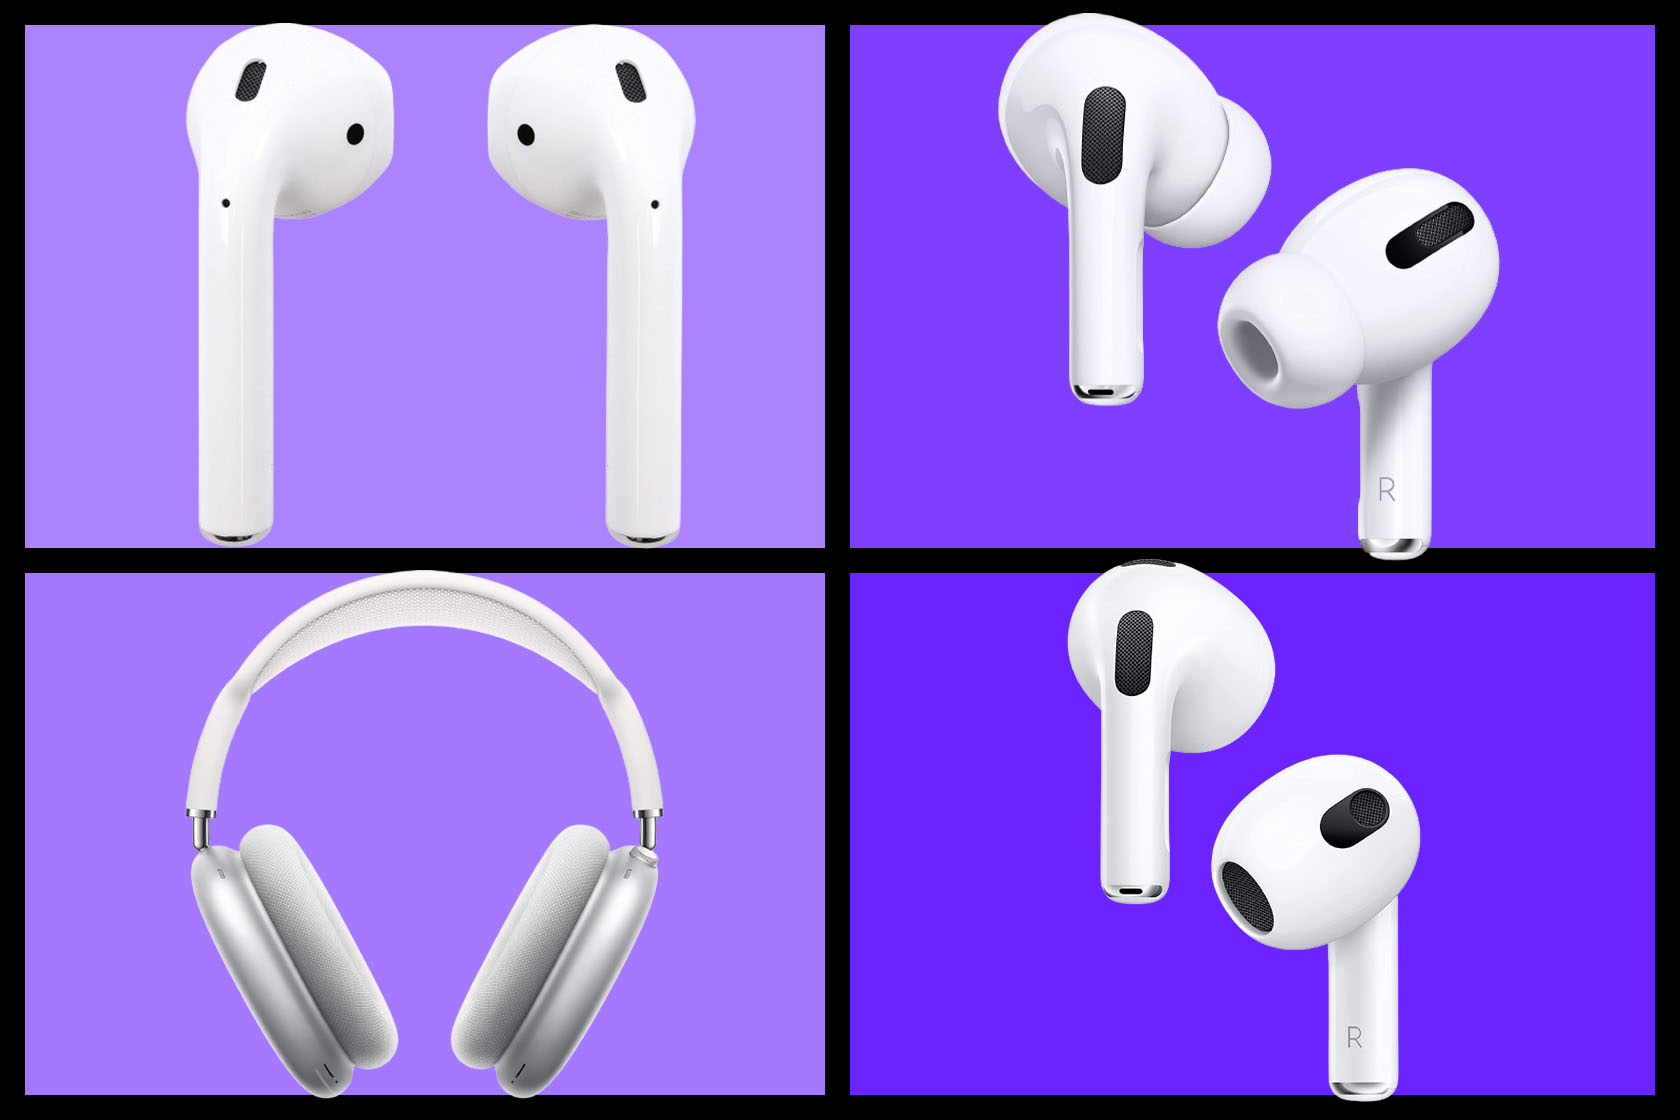 Differences between versions of Airpods